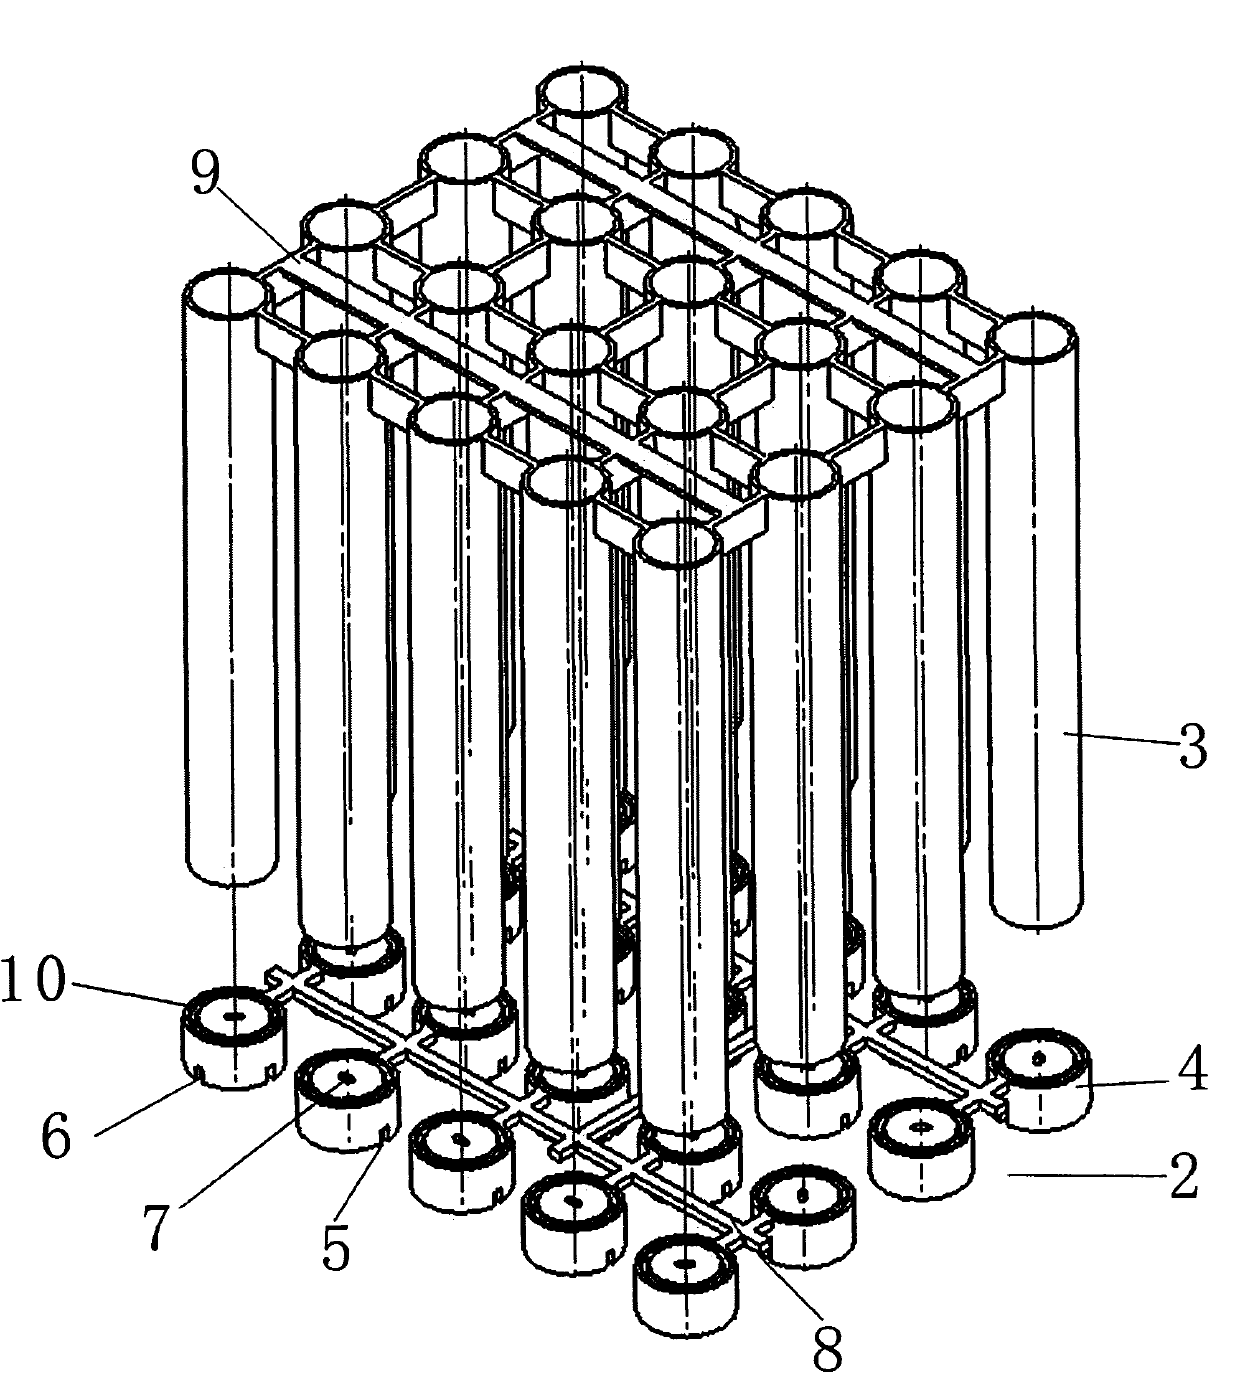 Automatic forming combined firework barrel